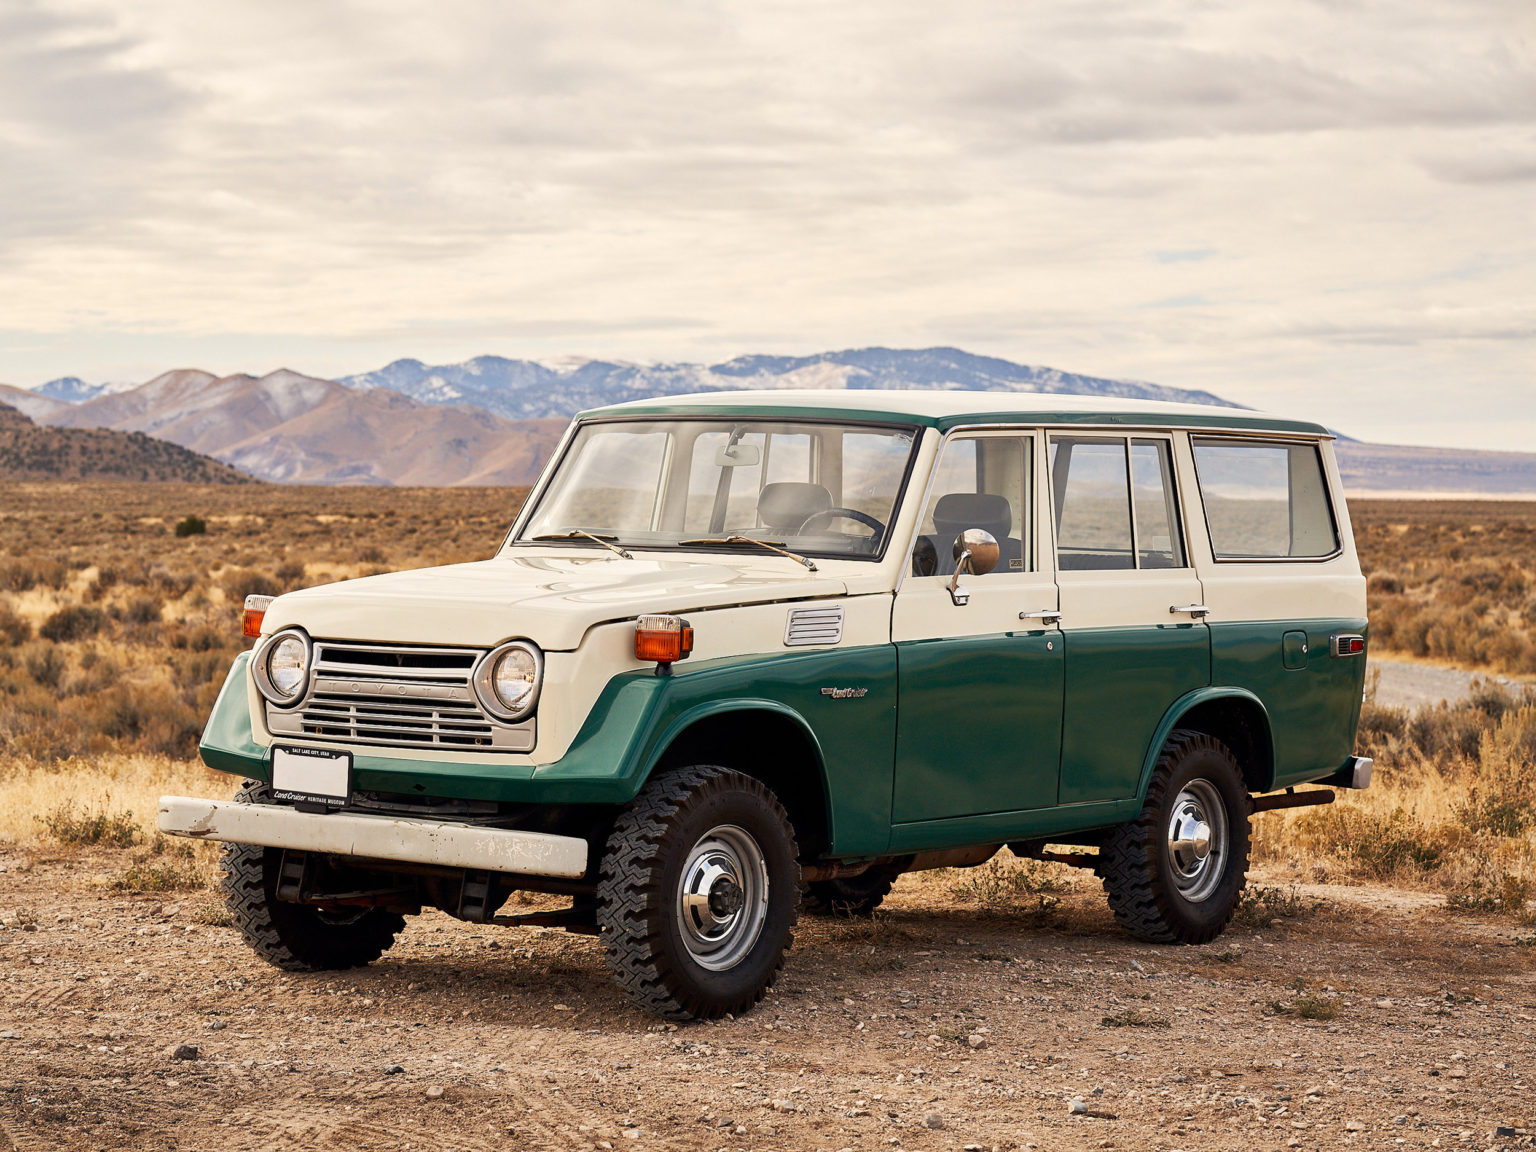 This vintage Land Cruiser is one of the most iconic models in the Toyota lineup.